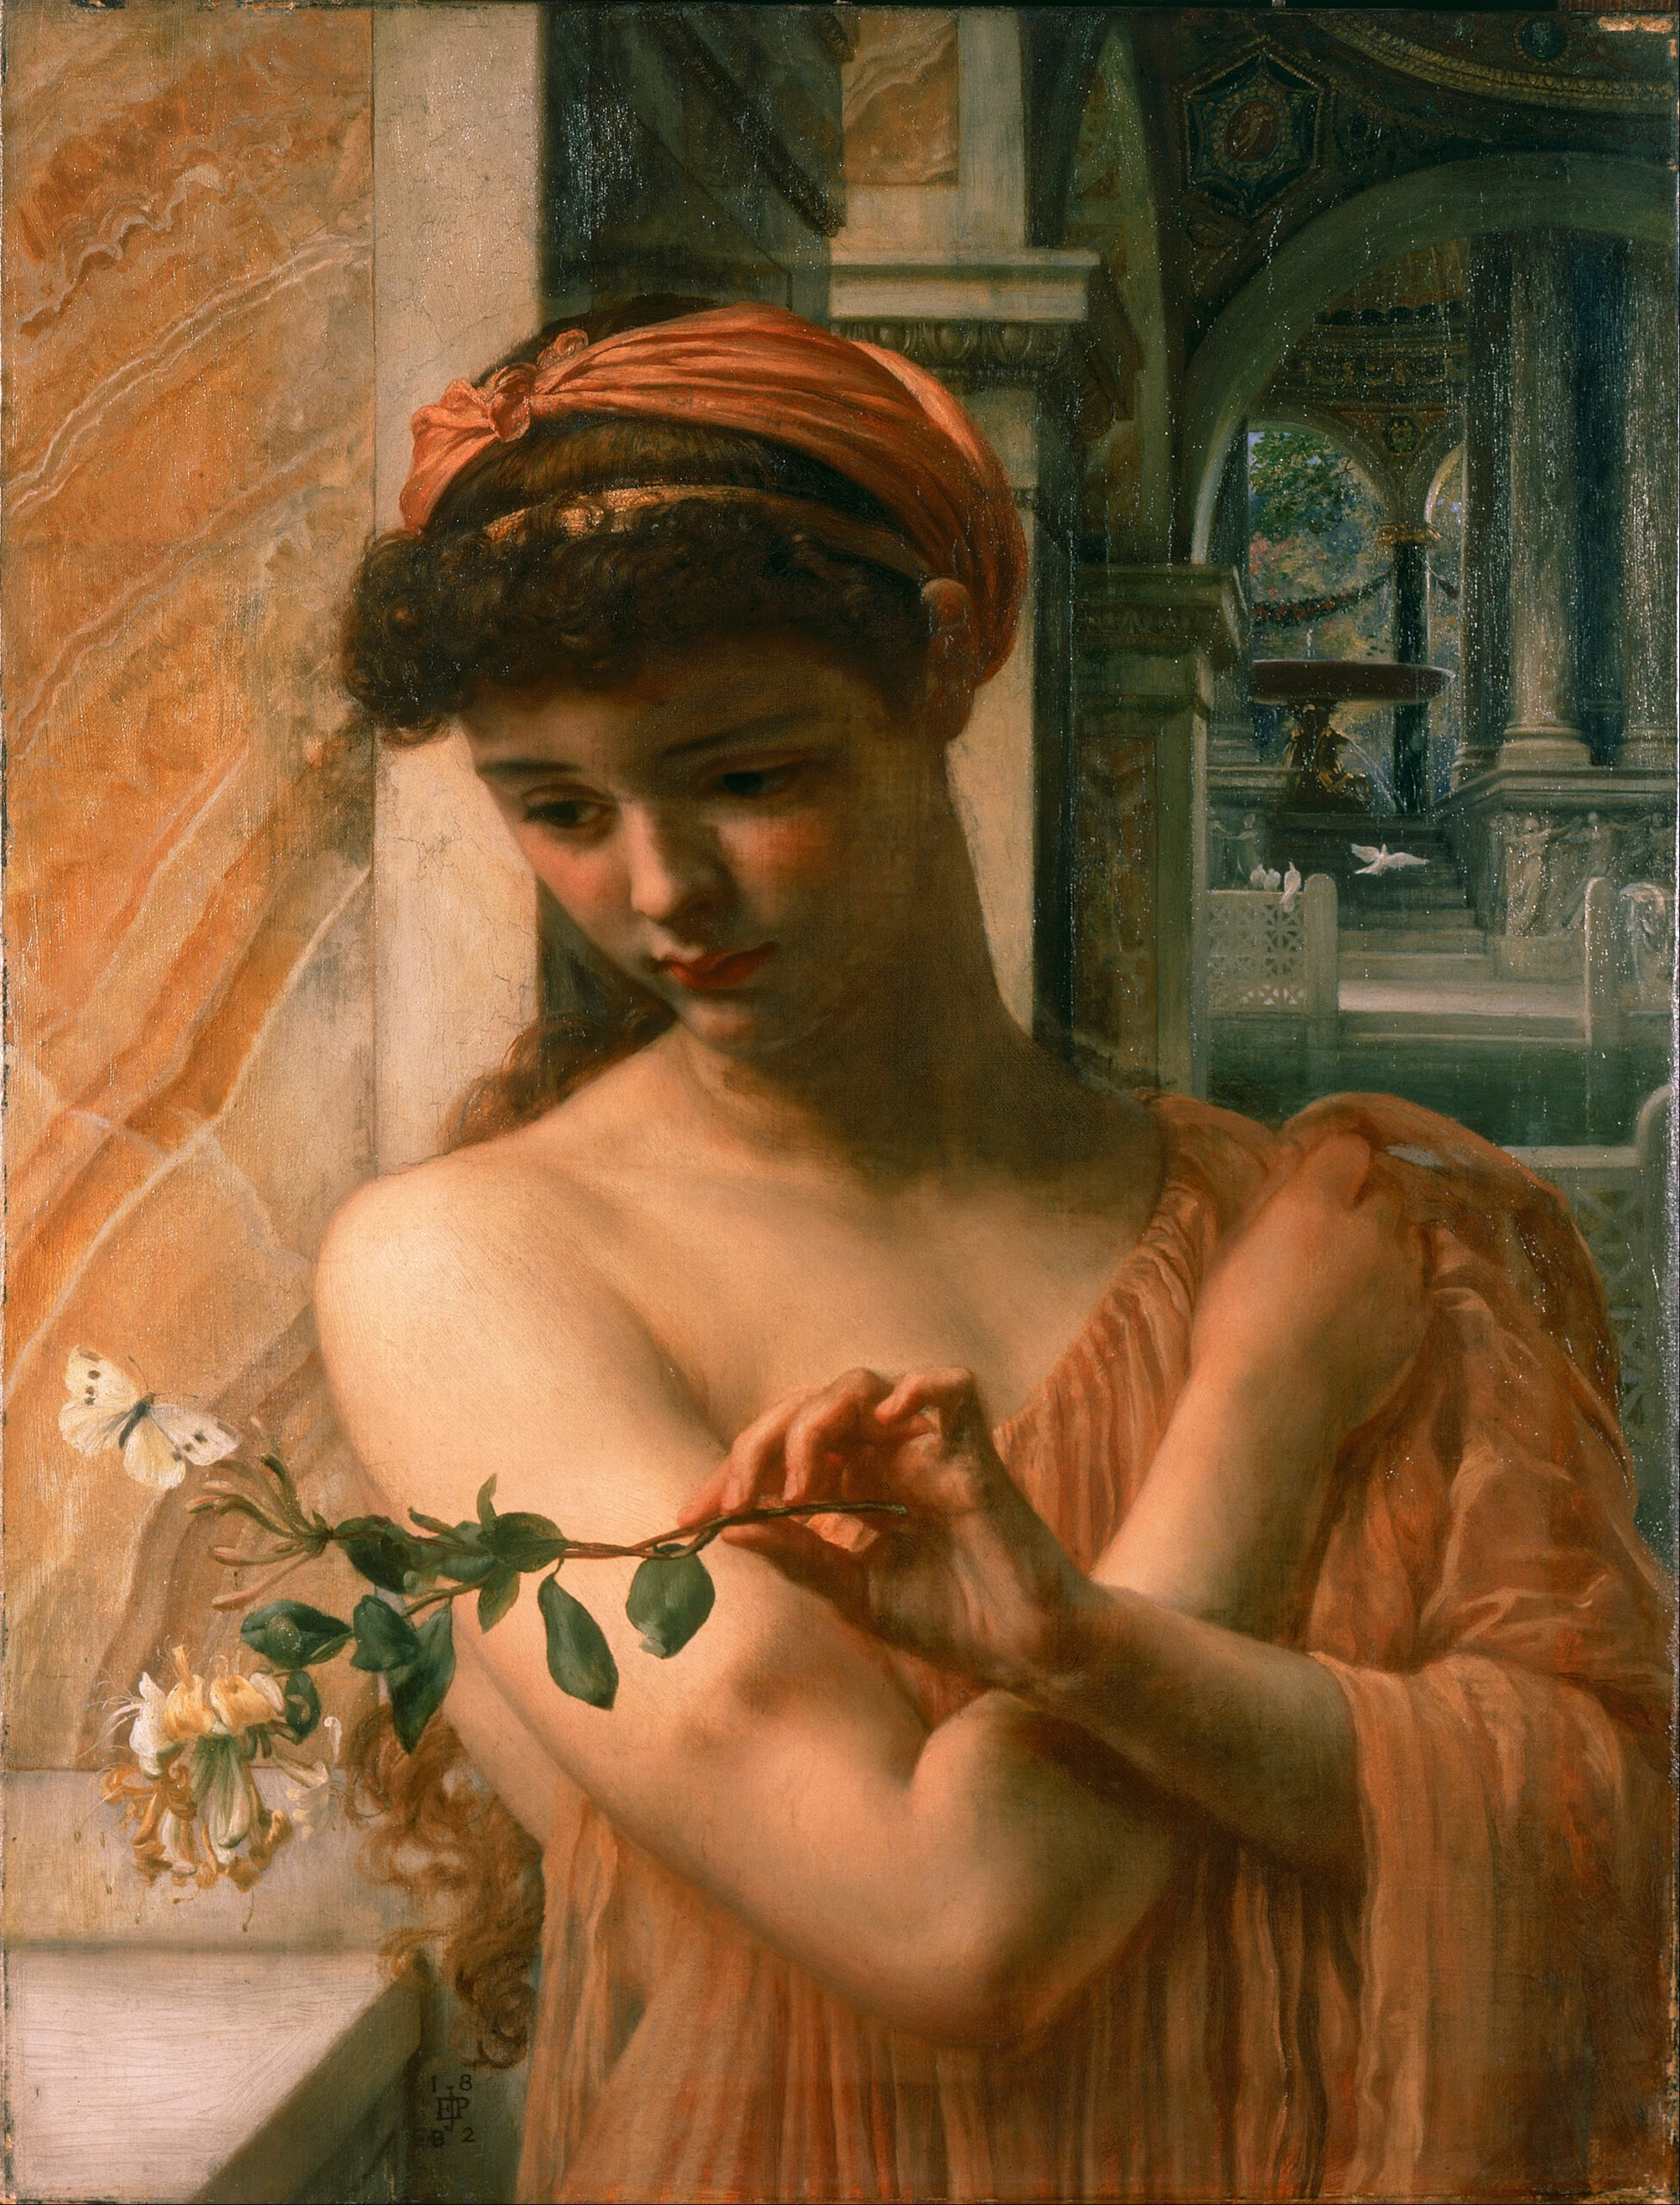 Title: Psyche in the Temple of Love Creator: Edward John Poynter Date Created: 1882 tag / style: Edward John Poynter; Psyche; mythological; Cupid; palace; temple; attribute; butterfly; flower; doves; Venus; woman; draped; aesthetic; art for art's sake